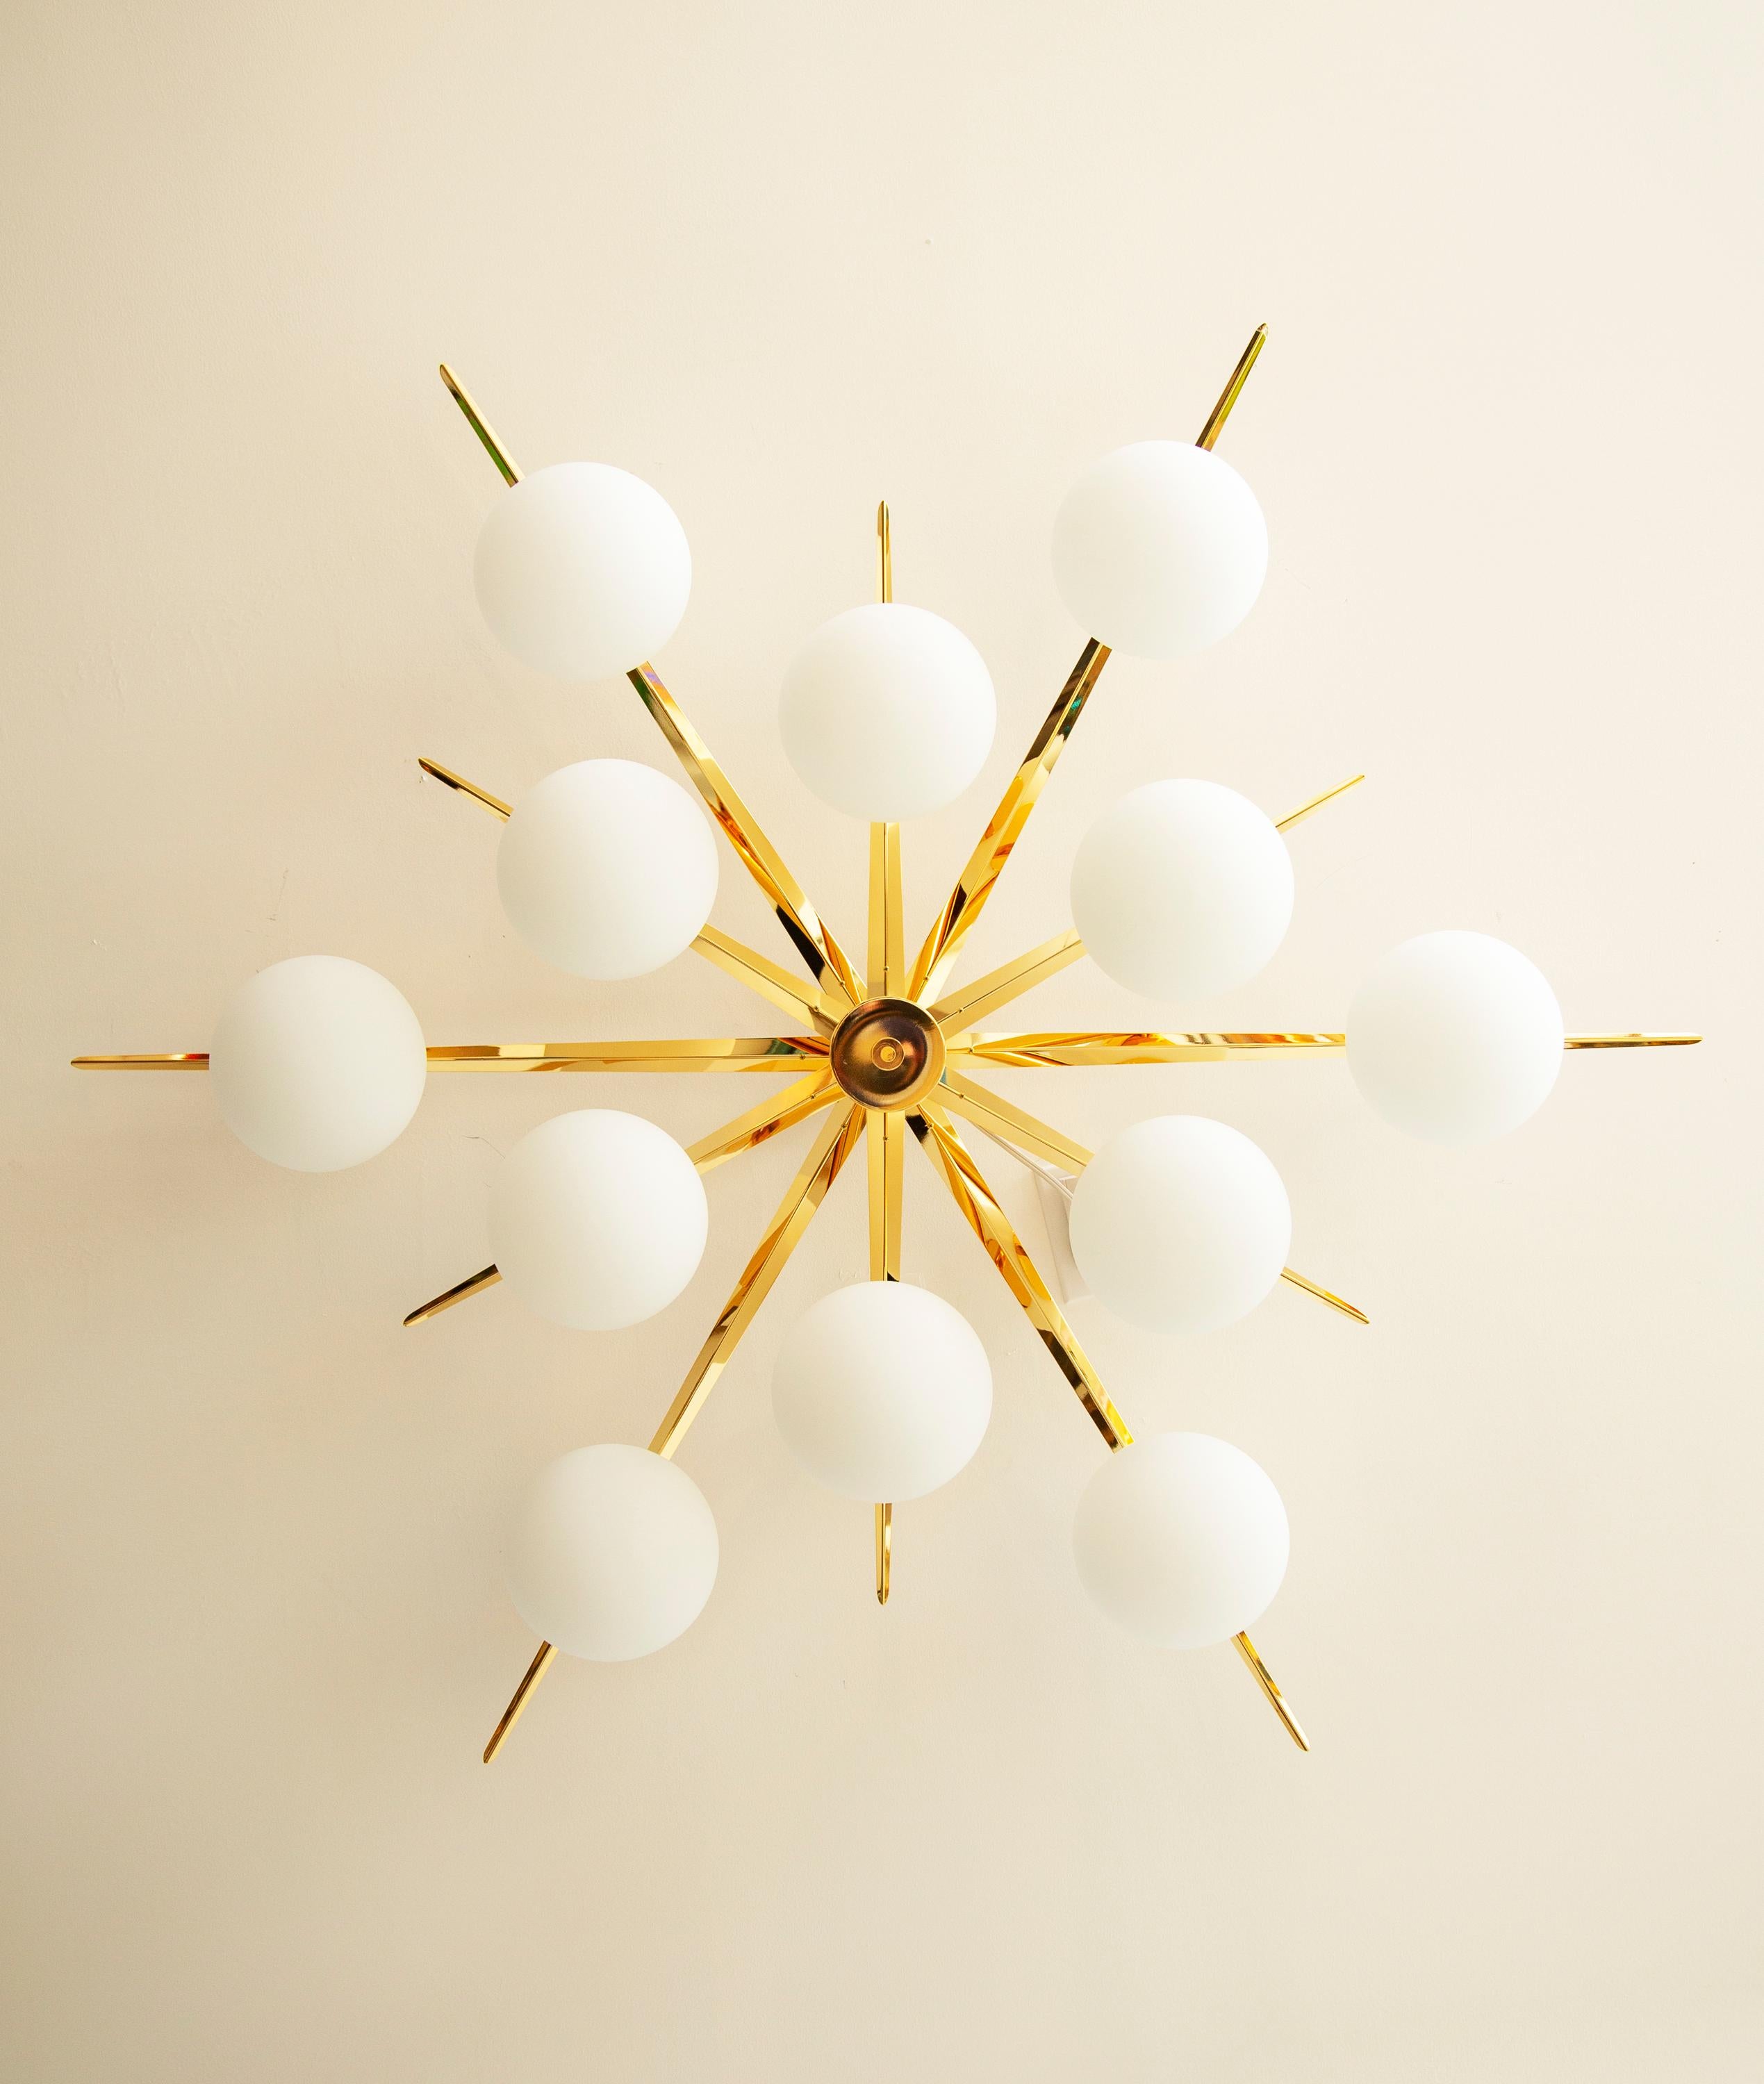 Contemporary flush mount starburst ceiling light in polished brass and matte glass
Features 12 oblong shape matte globes
Stunning design from all angles

Wattage per light: 25
Total wattage: 300
Bulb type: Candelabra size bulbs, 25 Watt recommended